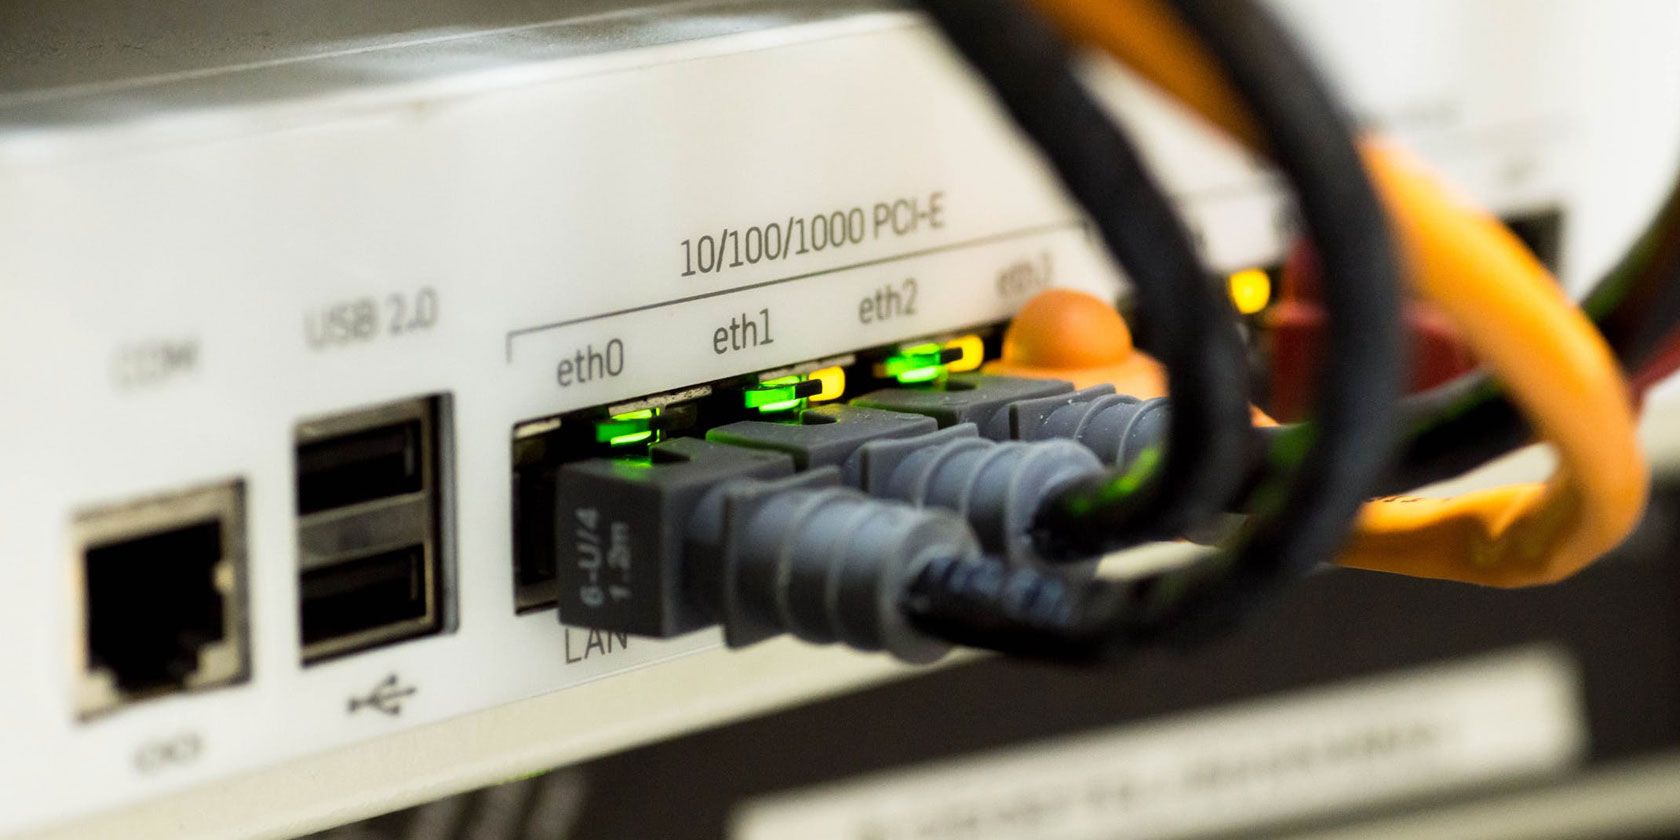 Network hardware issues: Faulty network switches, routers, or cables can contribute to IP address conflicts by causing intermittent connectivity problems.
IP address lease expiration: If a device fails to renew its IP address lease in time, another device may be assigned the same IP address, resulting in a conflict.